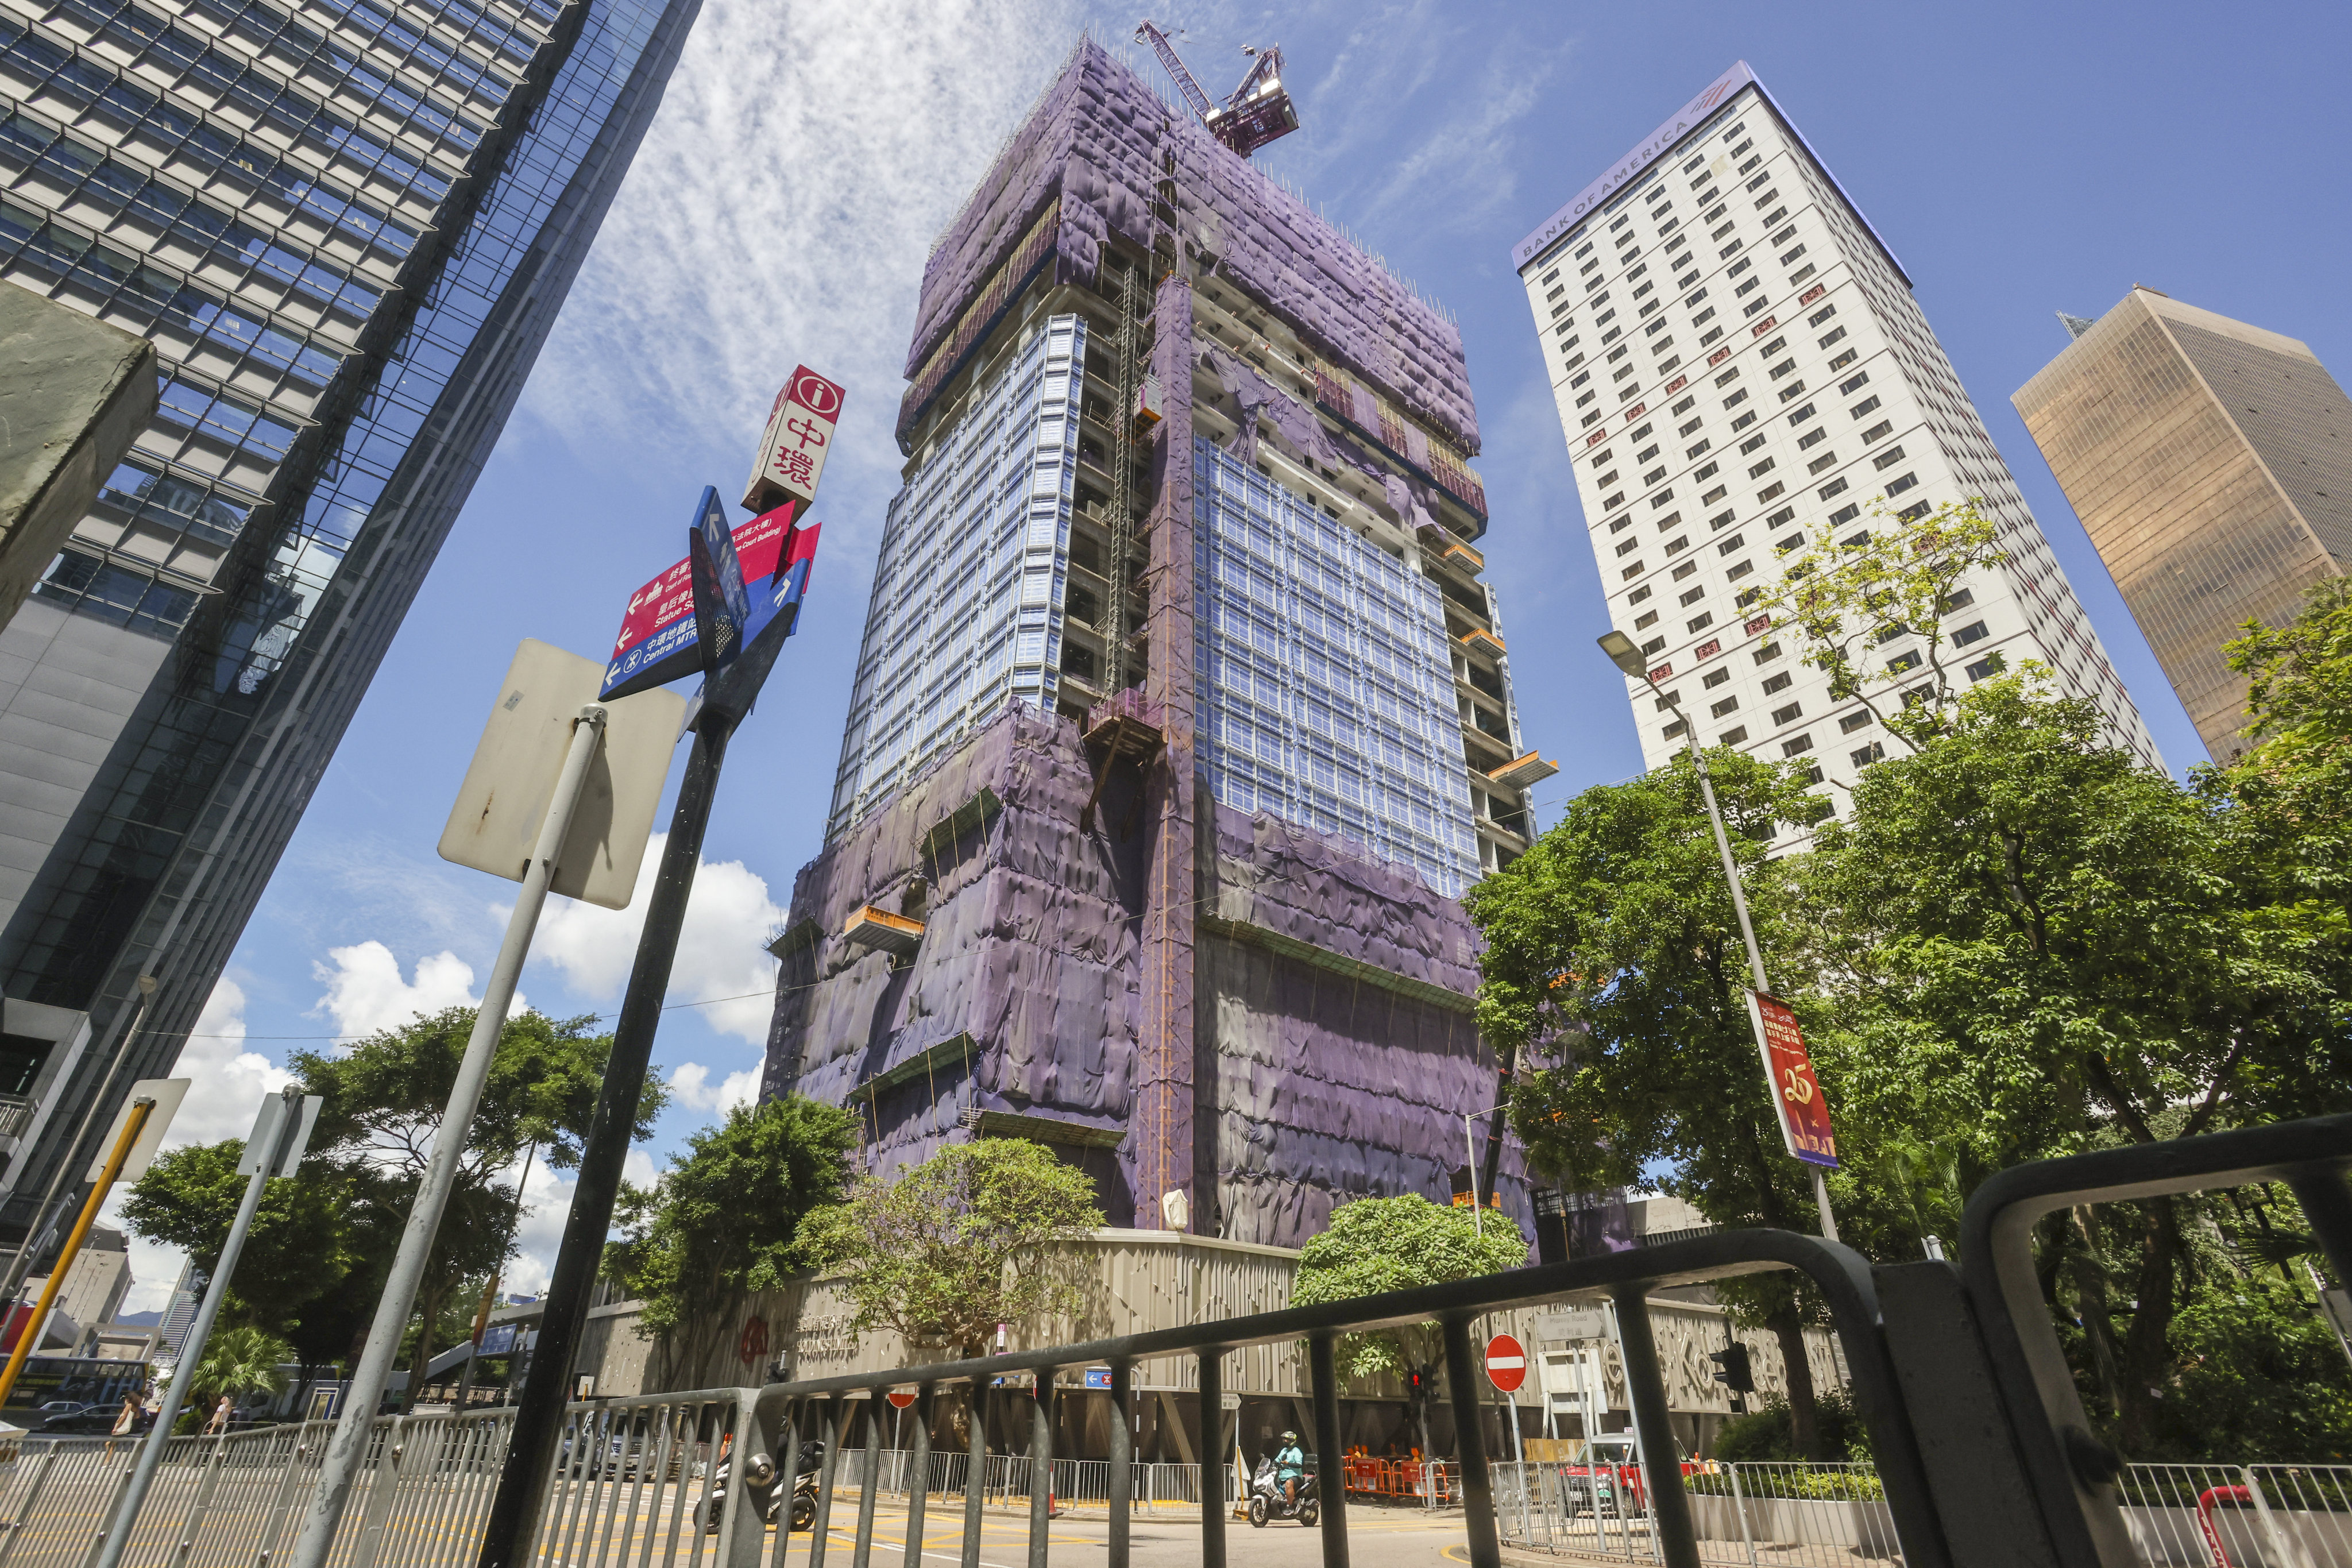 Cheung Kong Center II, a new prime office tower under construction in Central, will have 550,000 sq ft of gross floor area. Photo: SCMP / Jonathan Wong